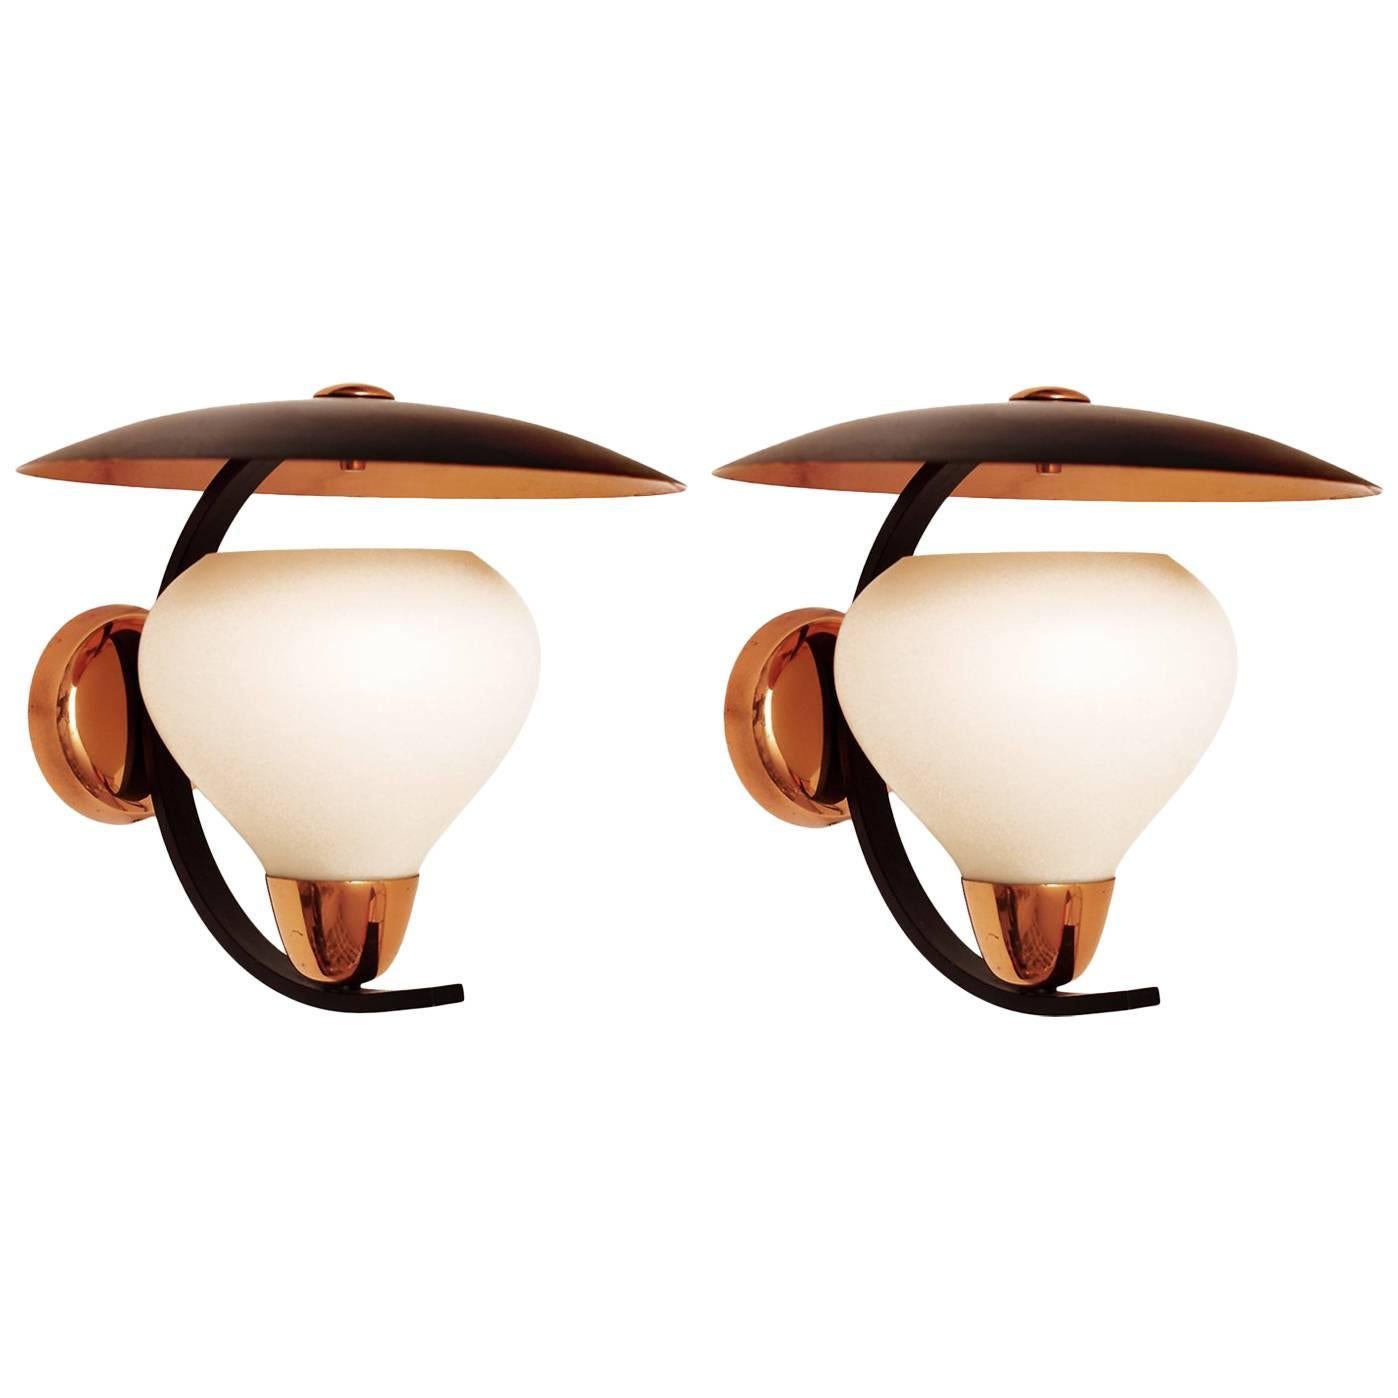 Pair of Large Vintage Mid-Century Wall Lights Sconces, 1950s